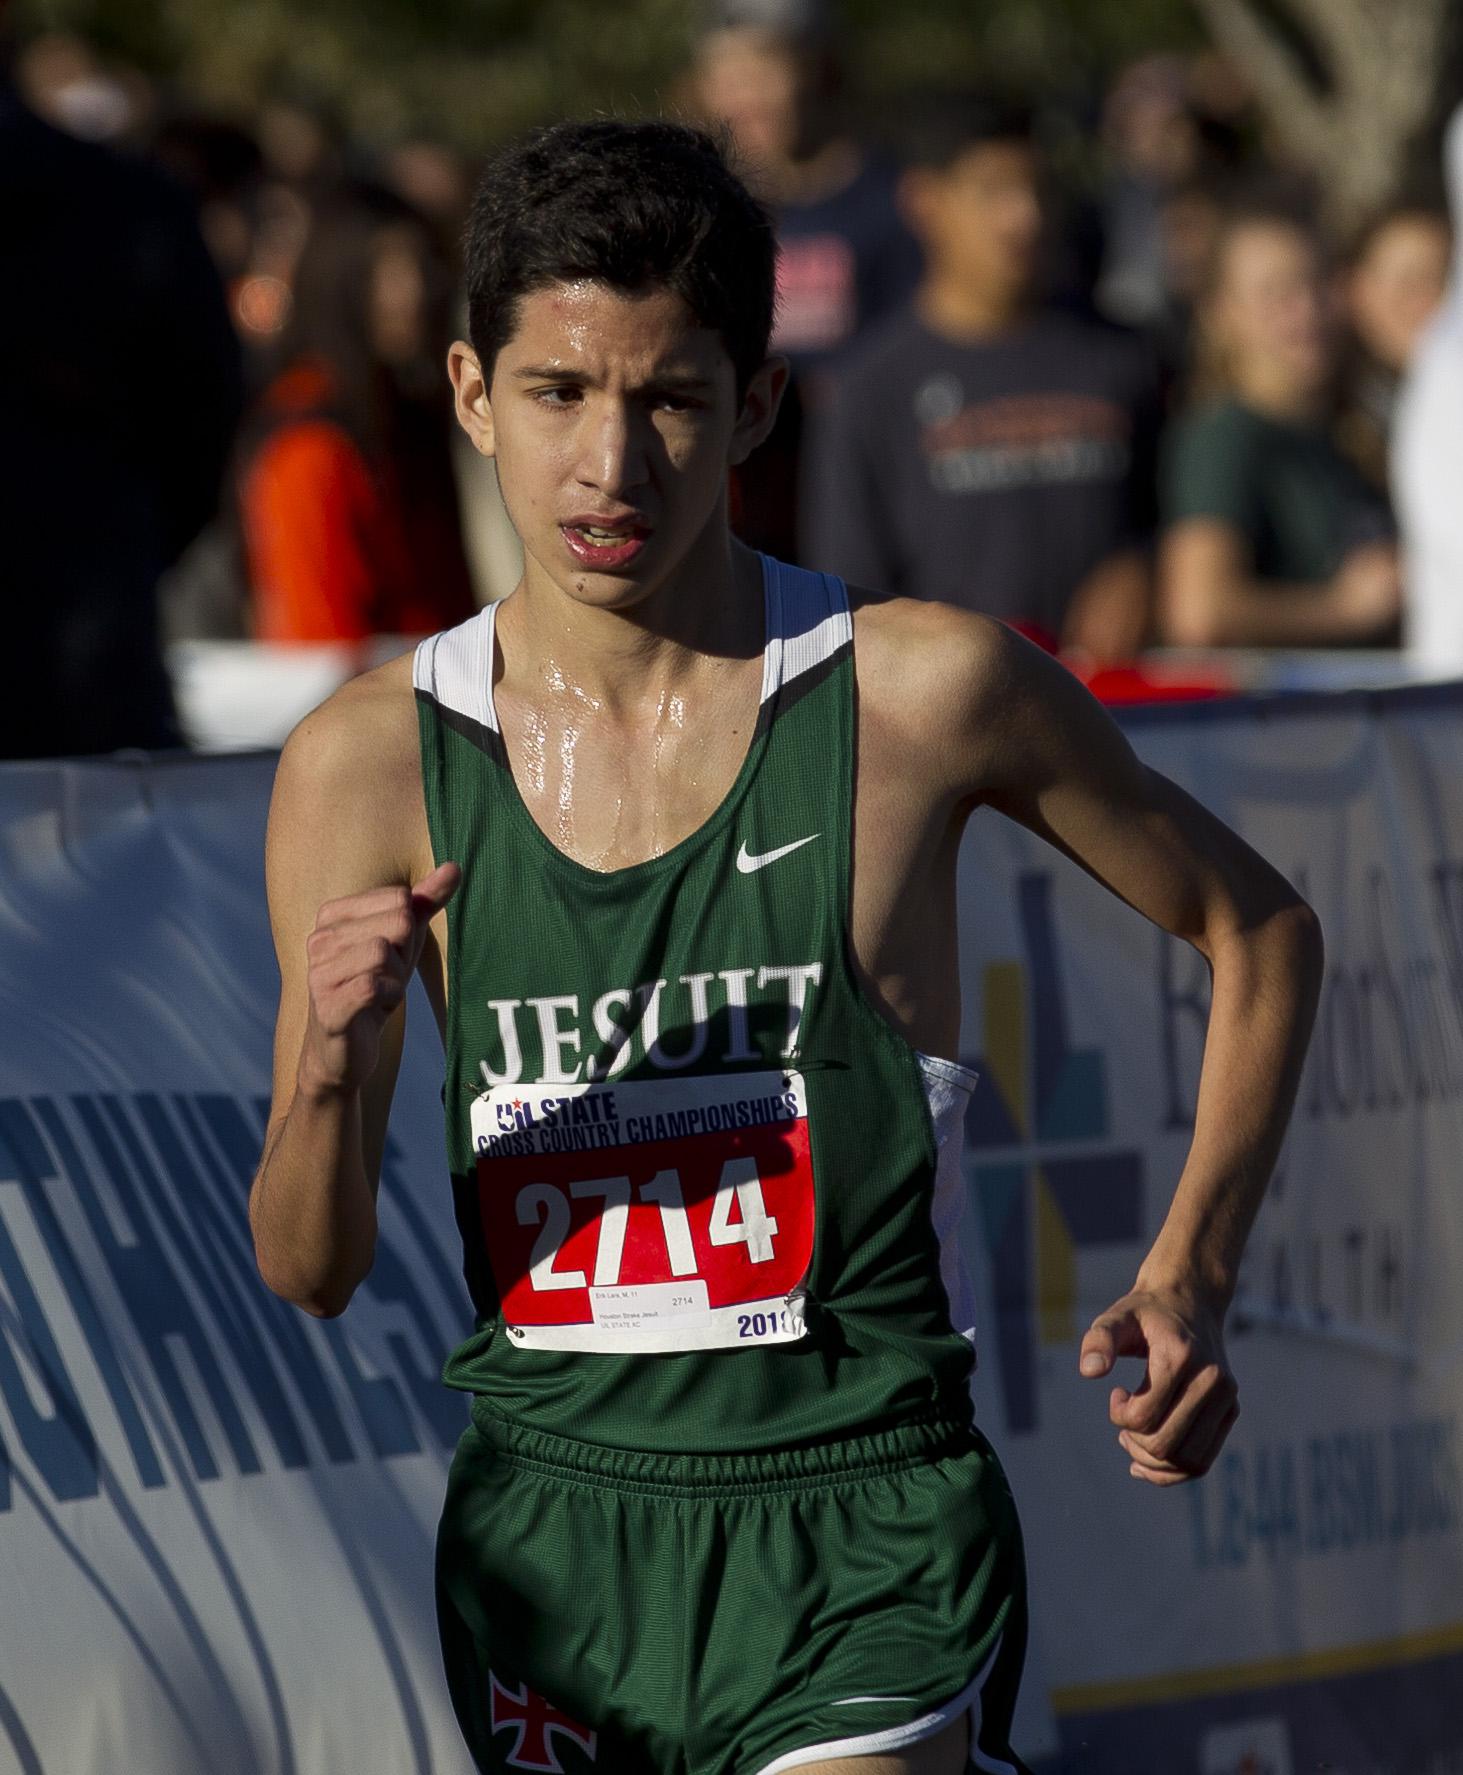 Strake Jesuit, Bellaire duo advance to UIL state cross country meet